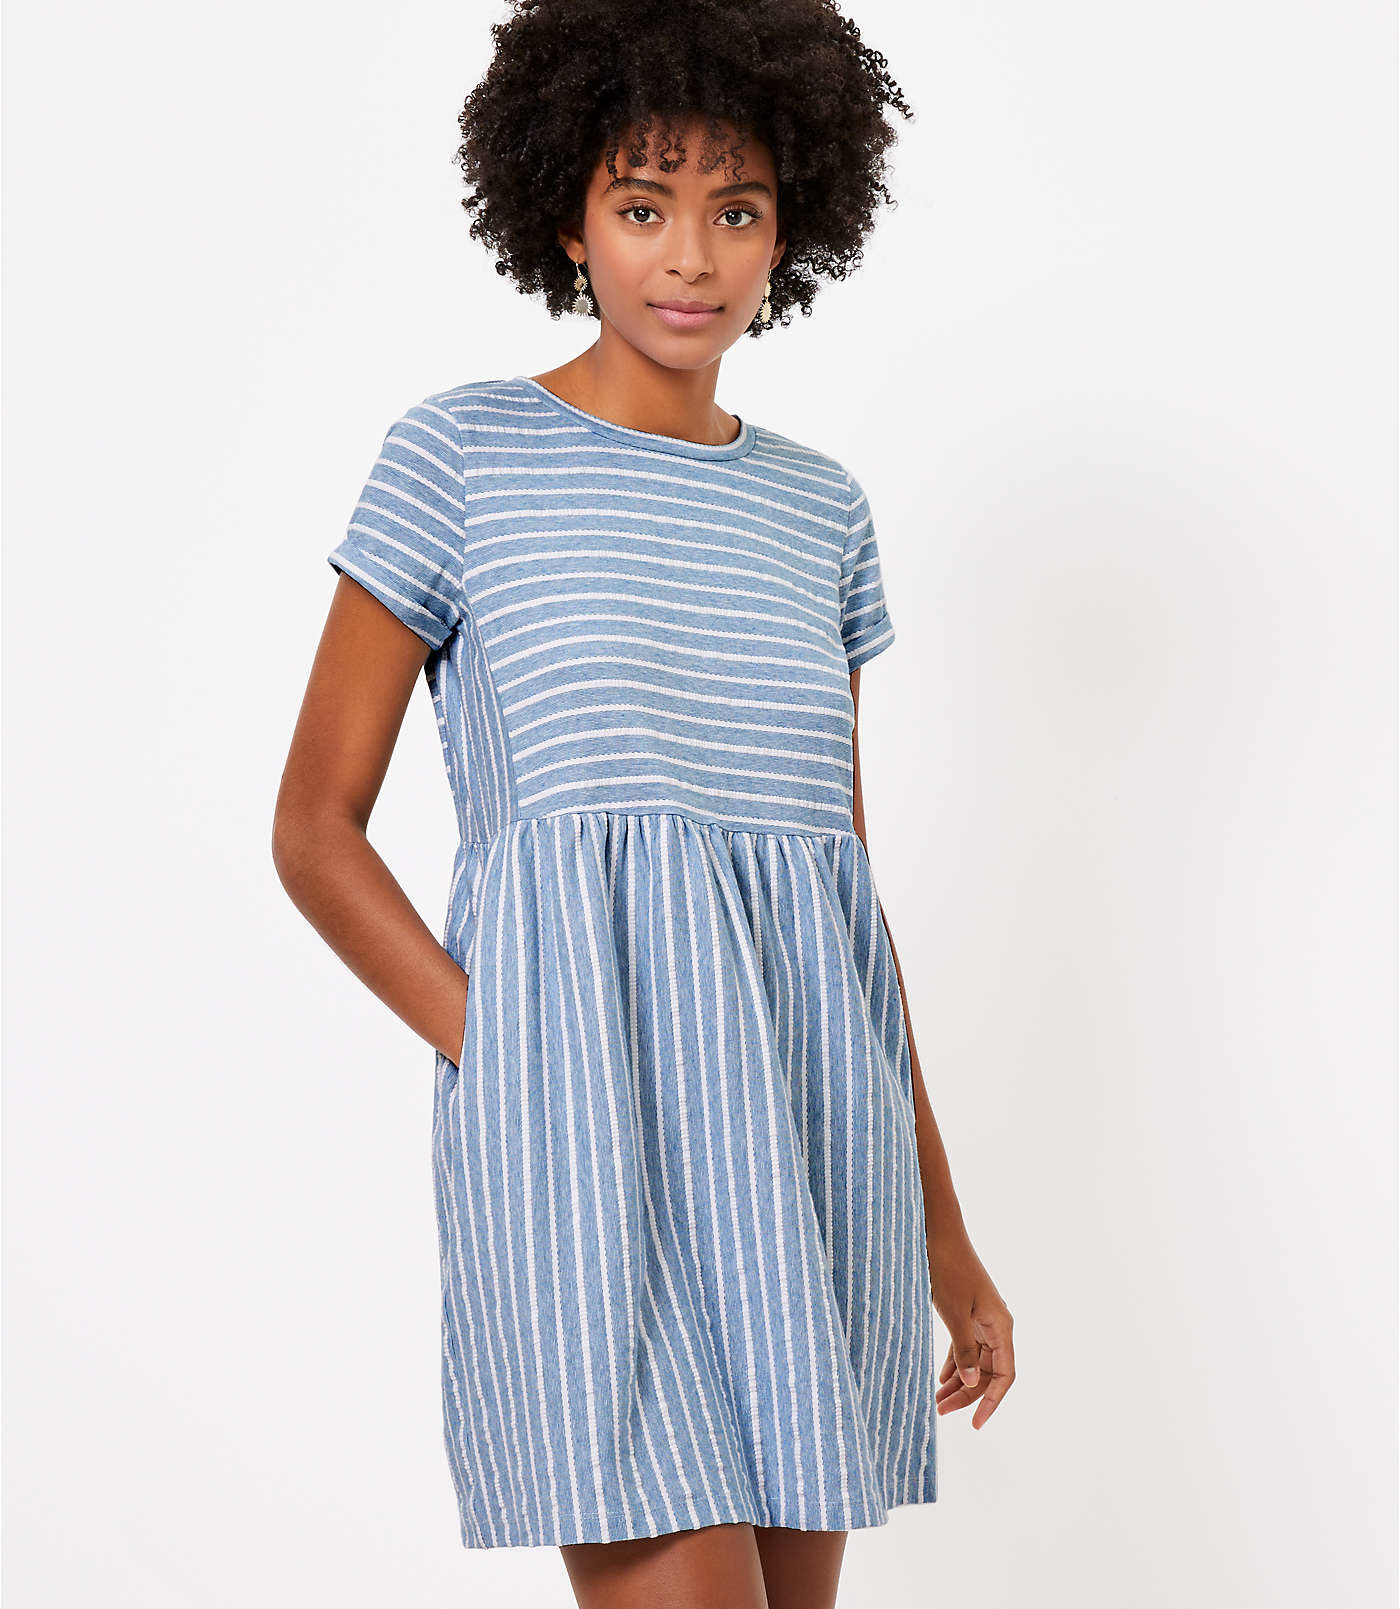 model wearing blue and white striped dress